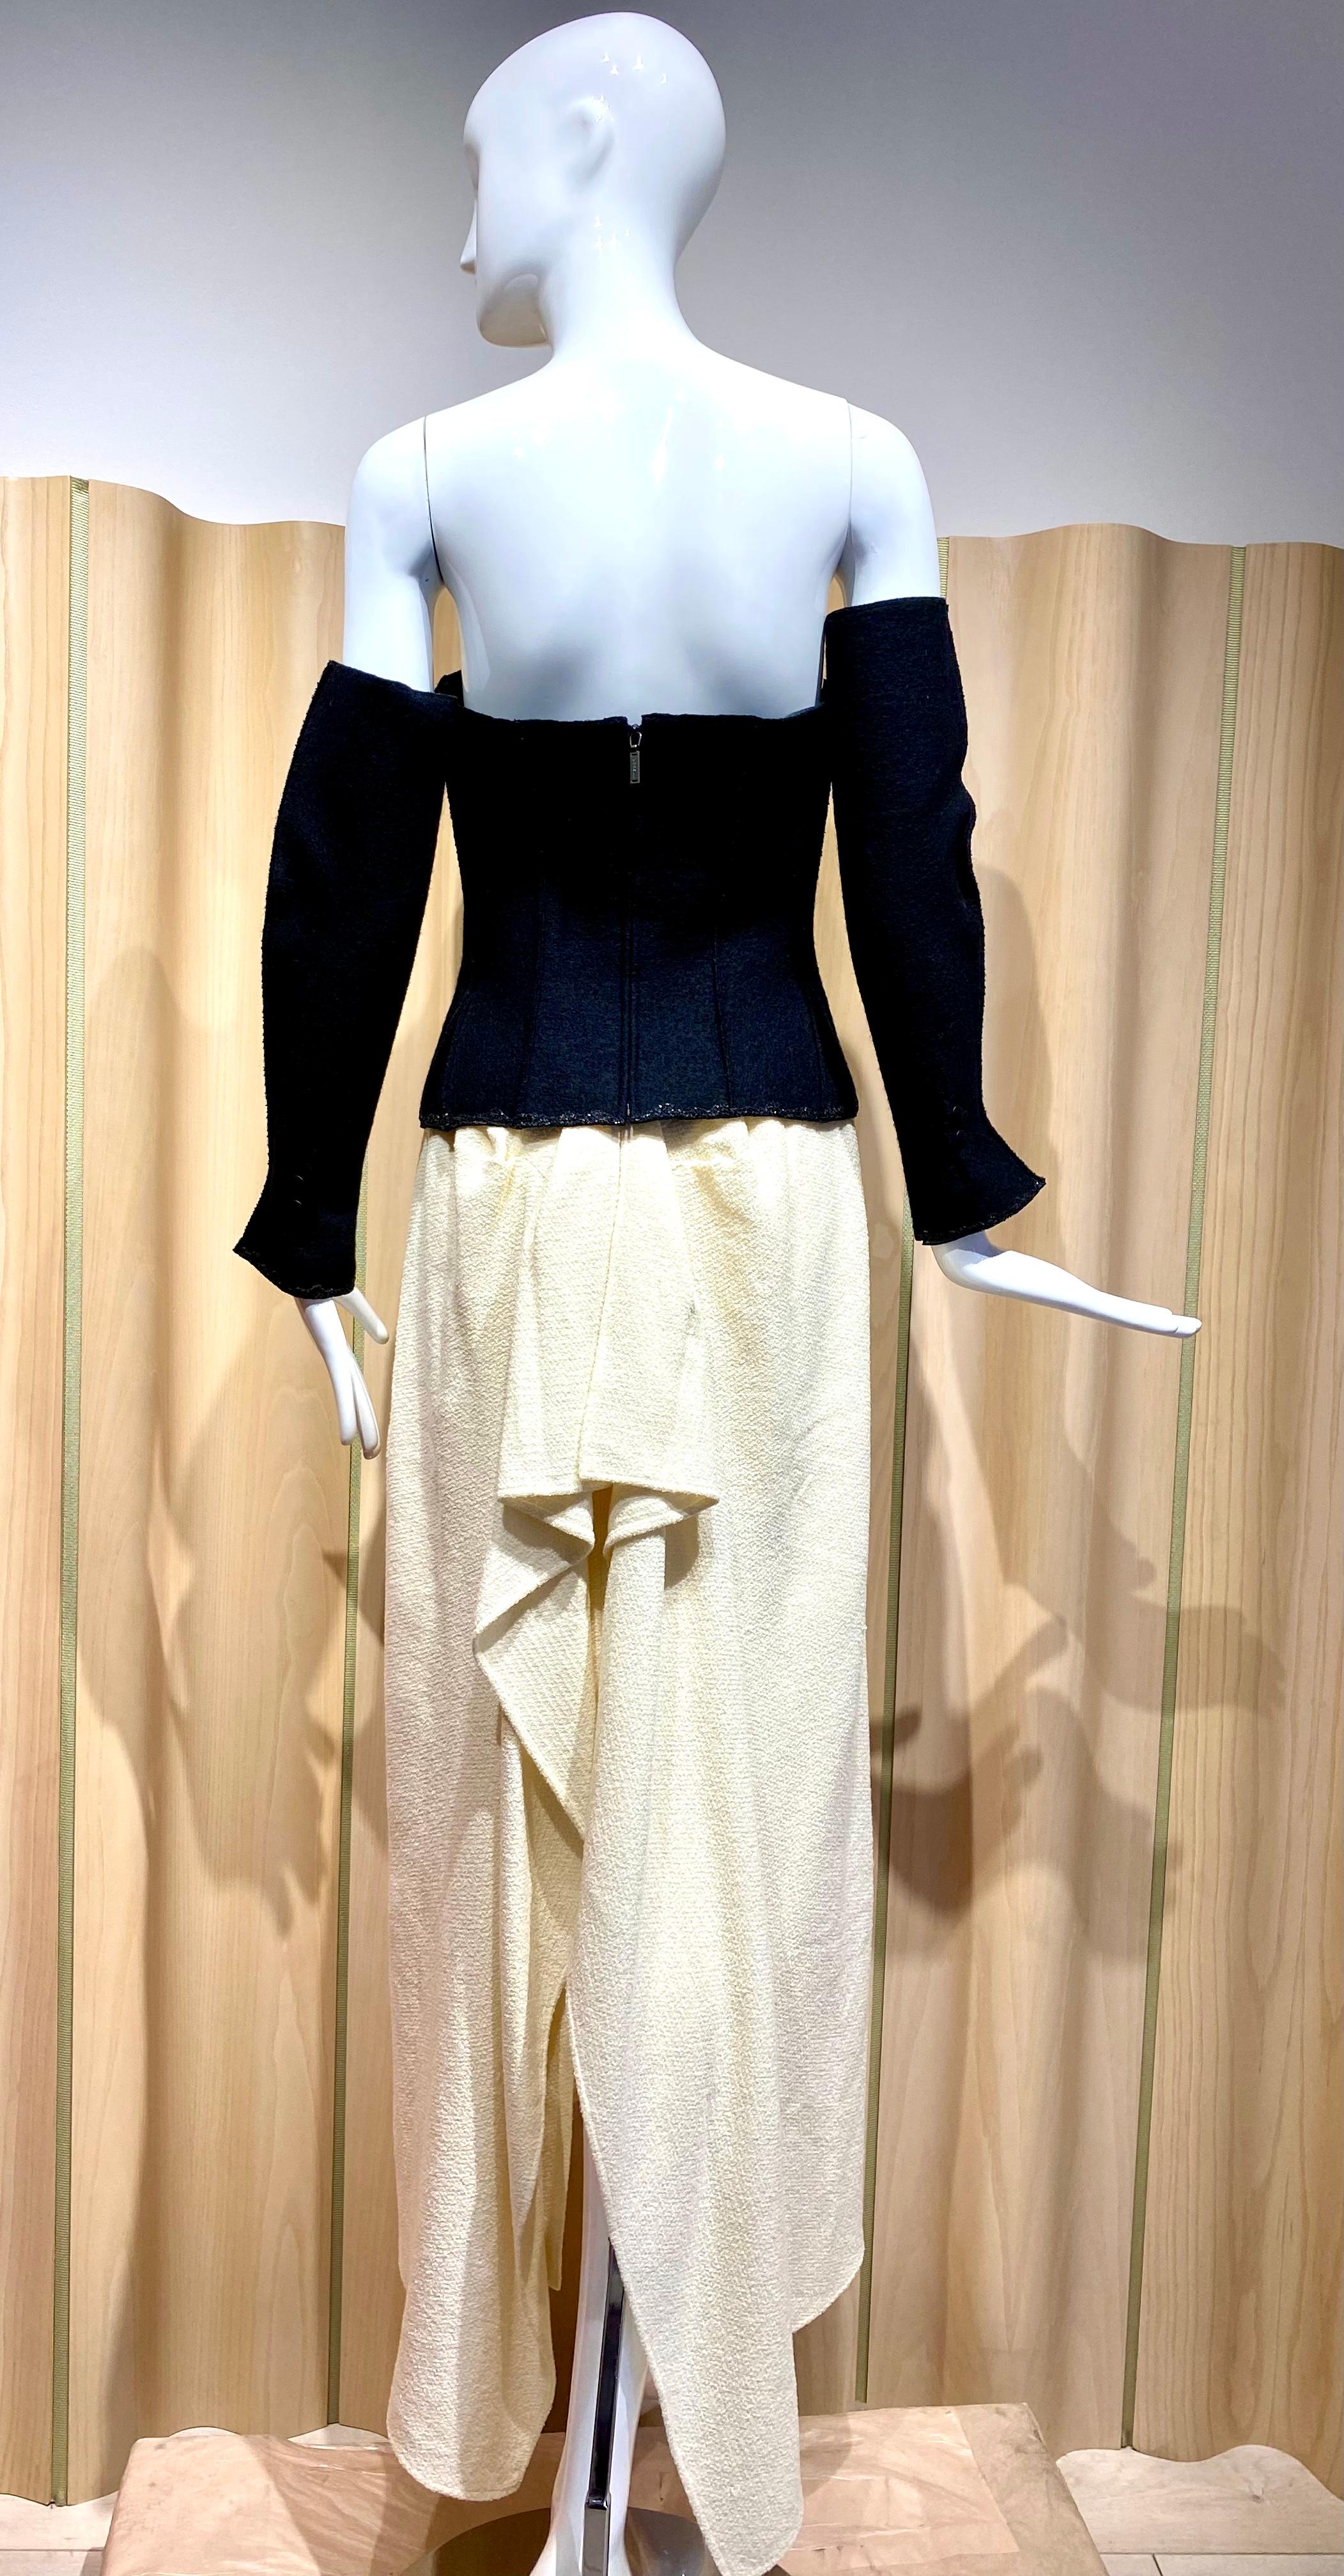 1998 3 pcs Chanel by Karl Lagerfeld Black Crepe Bustier Corset and Creme bustle skirt with detachable sleeves and short sash that you can style it as a strap or scarf.
Perfect for Wedding gown or Black tie event.
Bustier Measurement:  fit 35” Bust /